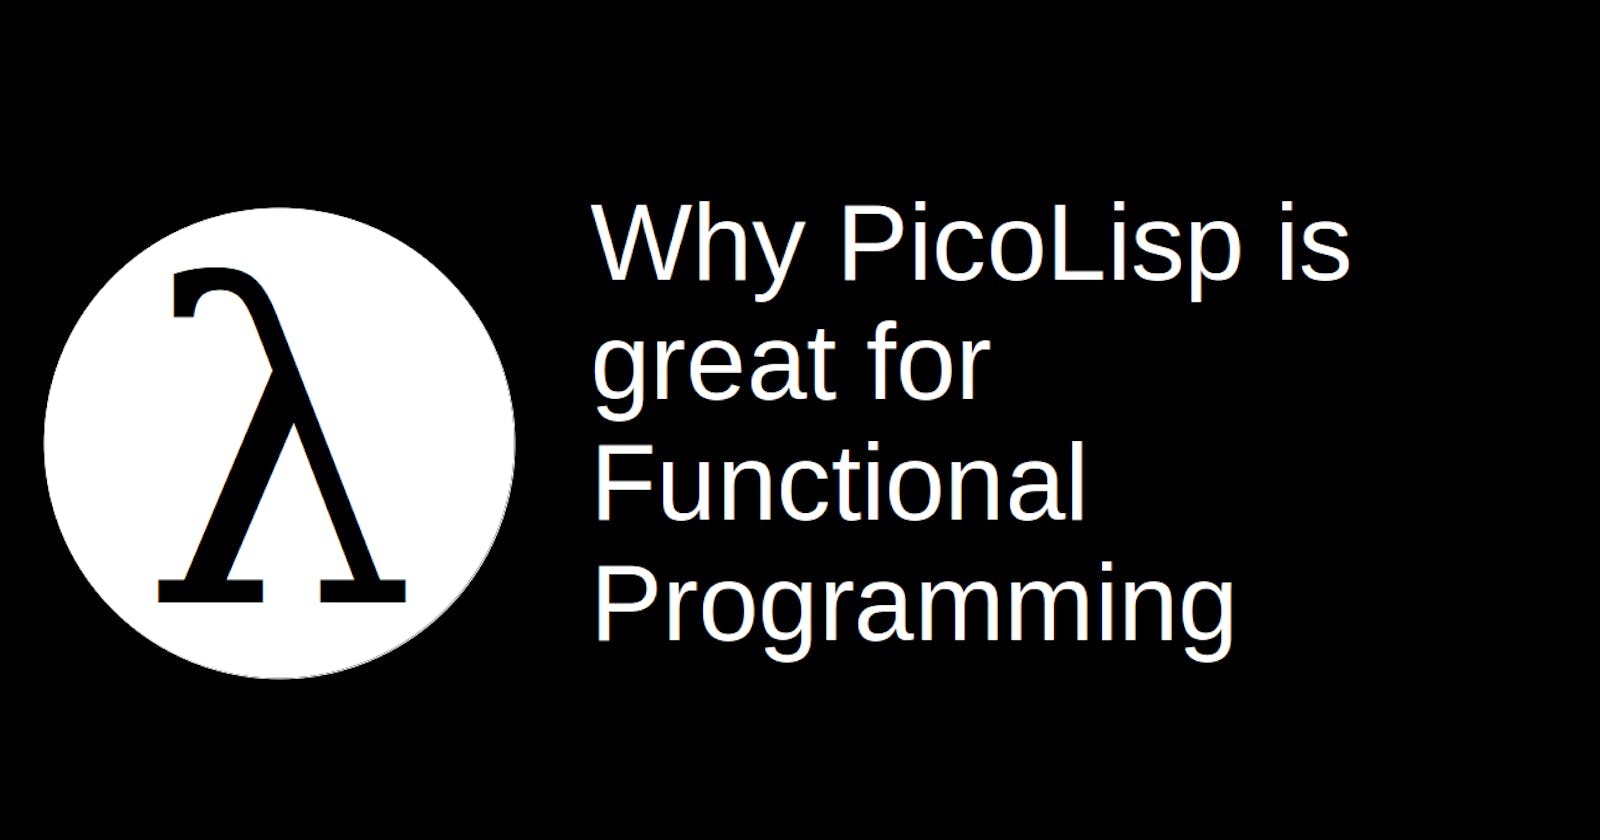 Why PicoLisp is great for Functional Programming